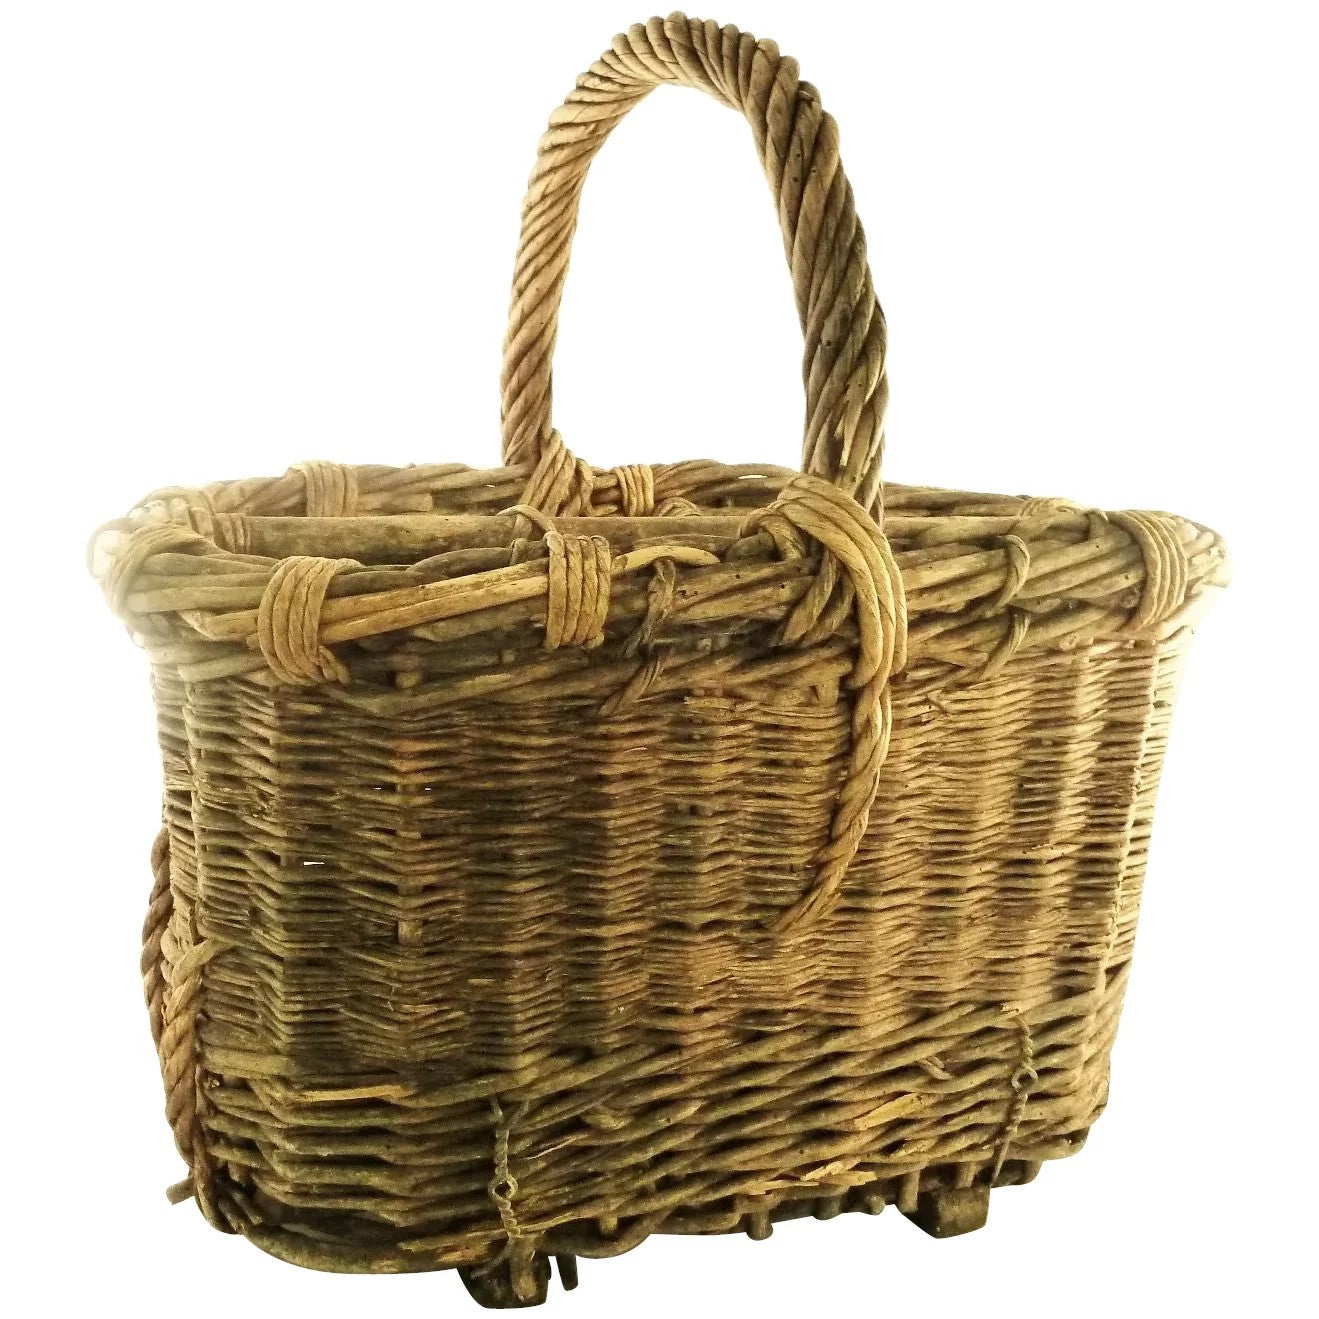 Antique French Provincial Wicker Wine Basket or Carrier - 43 Chesapeake Court Antiques